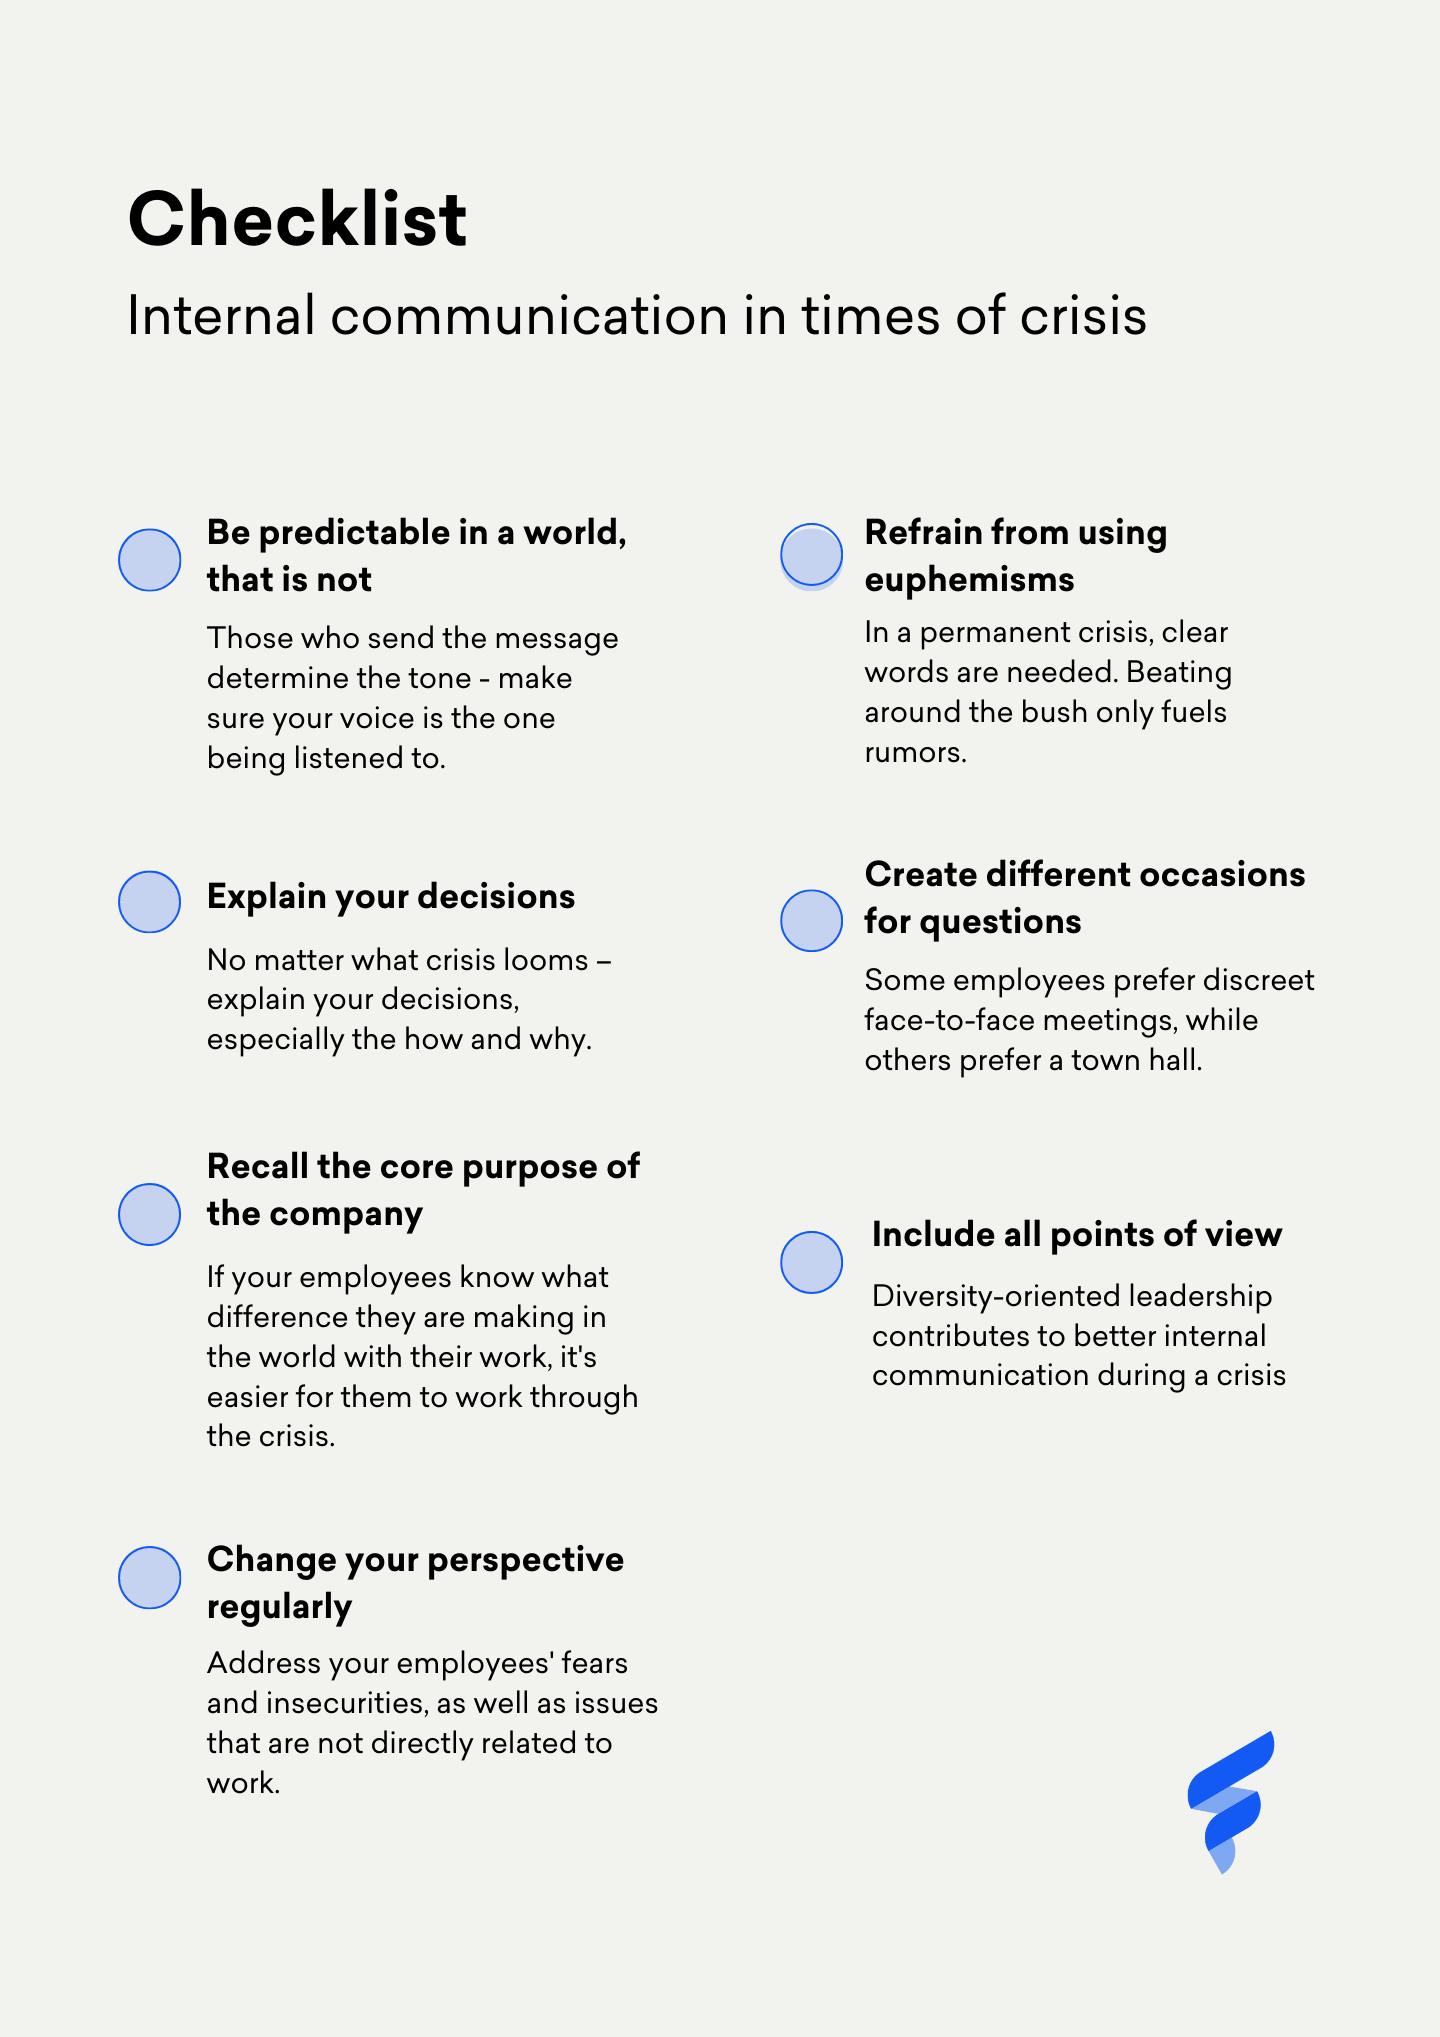 Checklist of internal communication in times of crisis